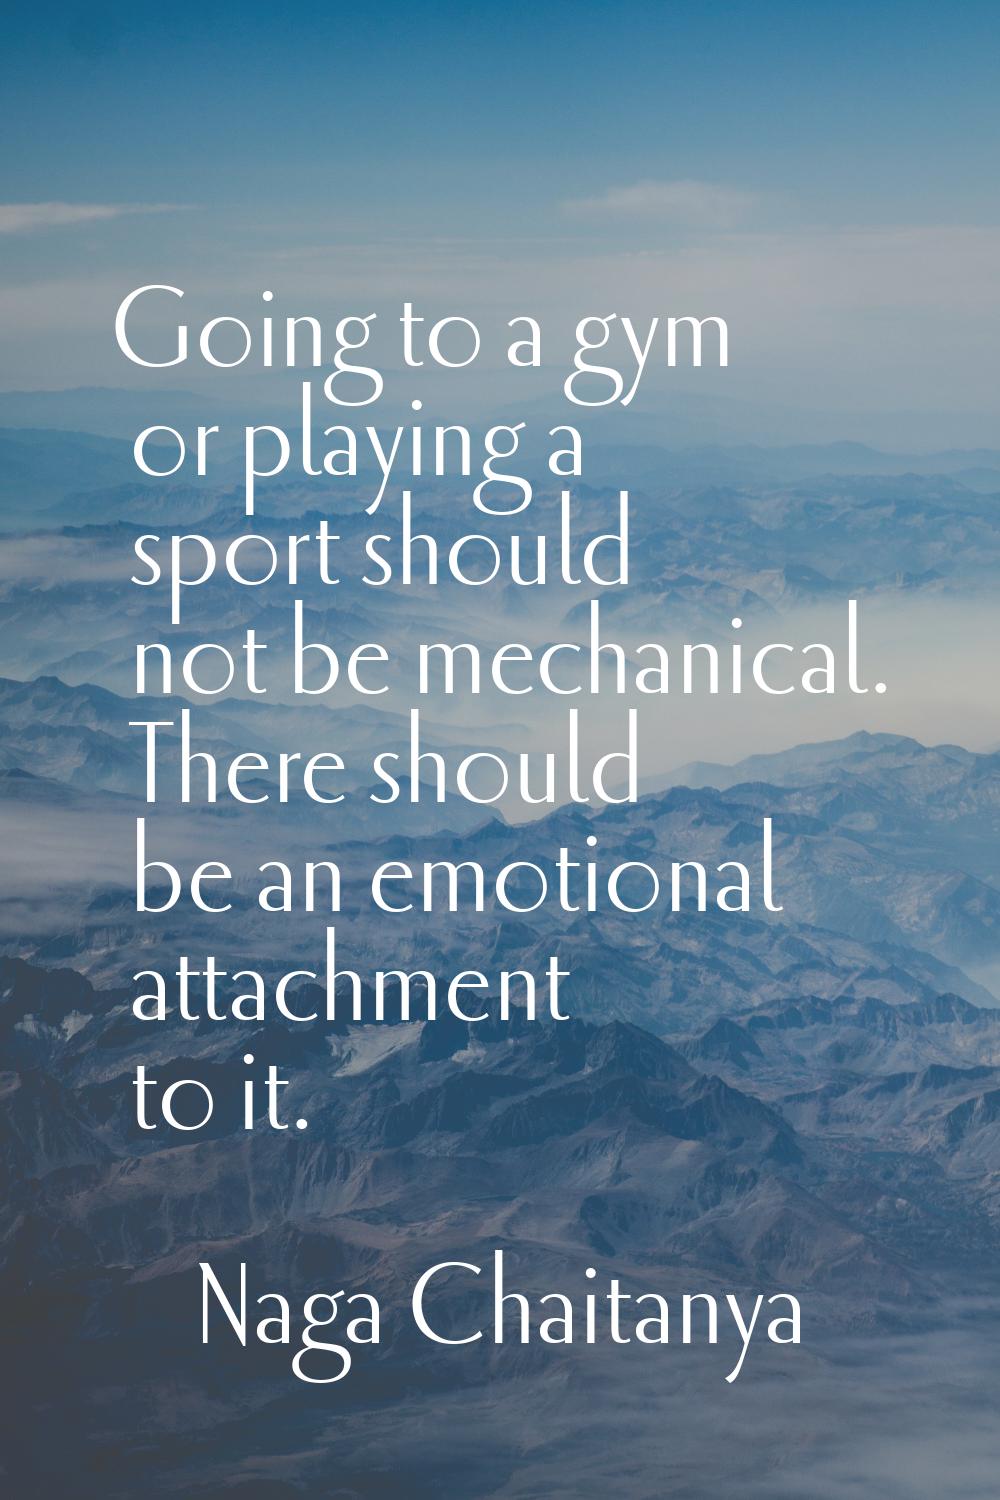 Going to a gym or playing a sport should not be mechanical. There should be an emotional attachment